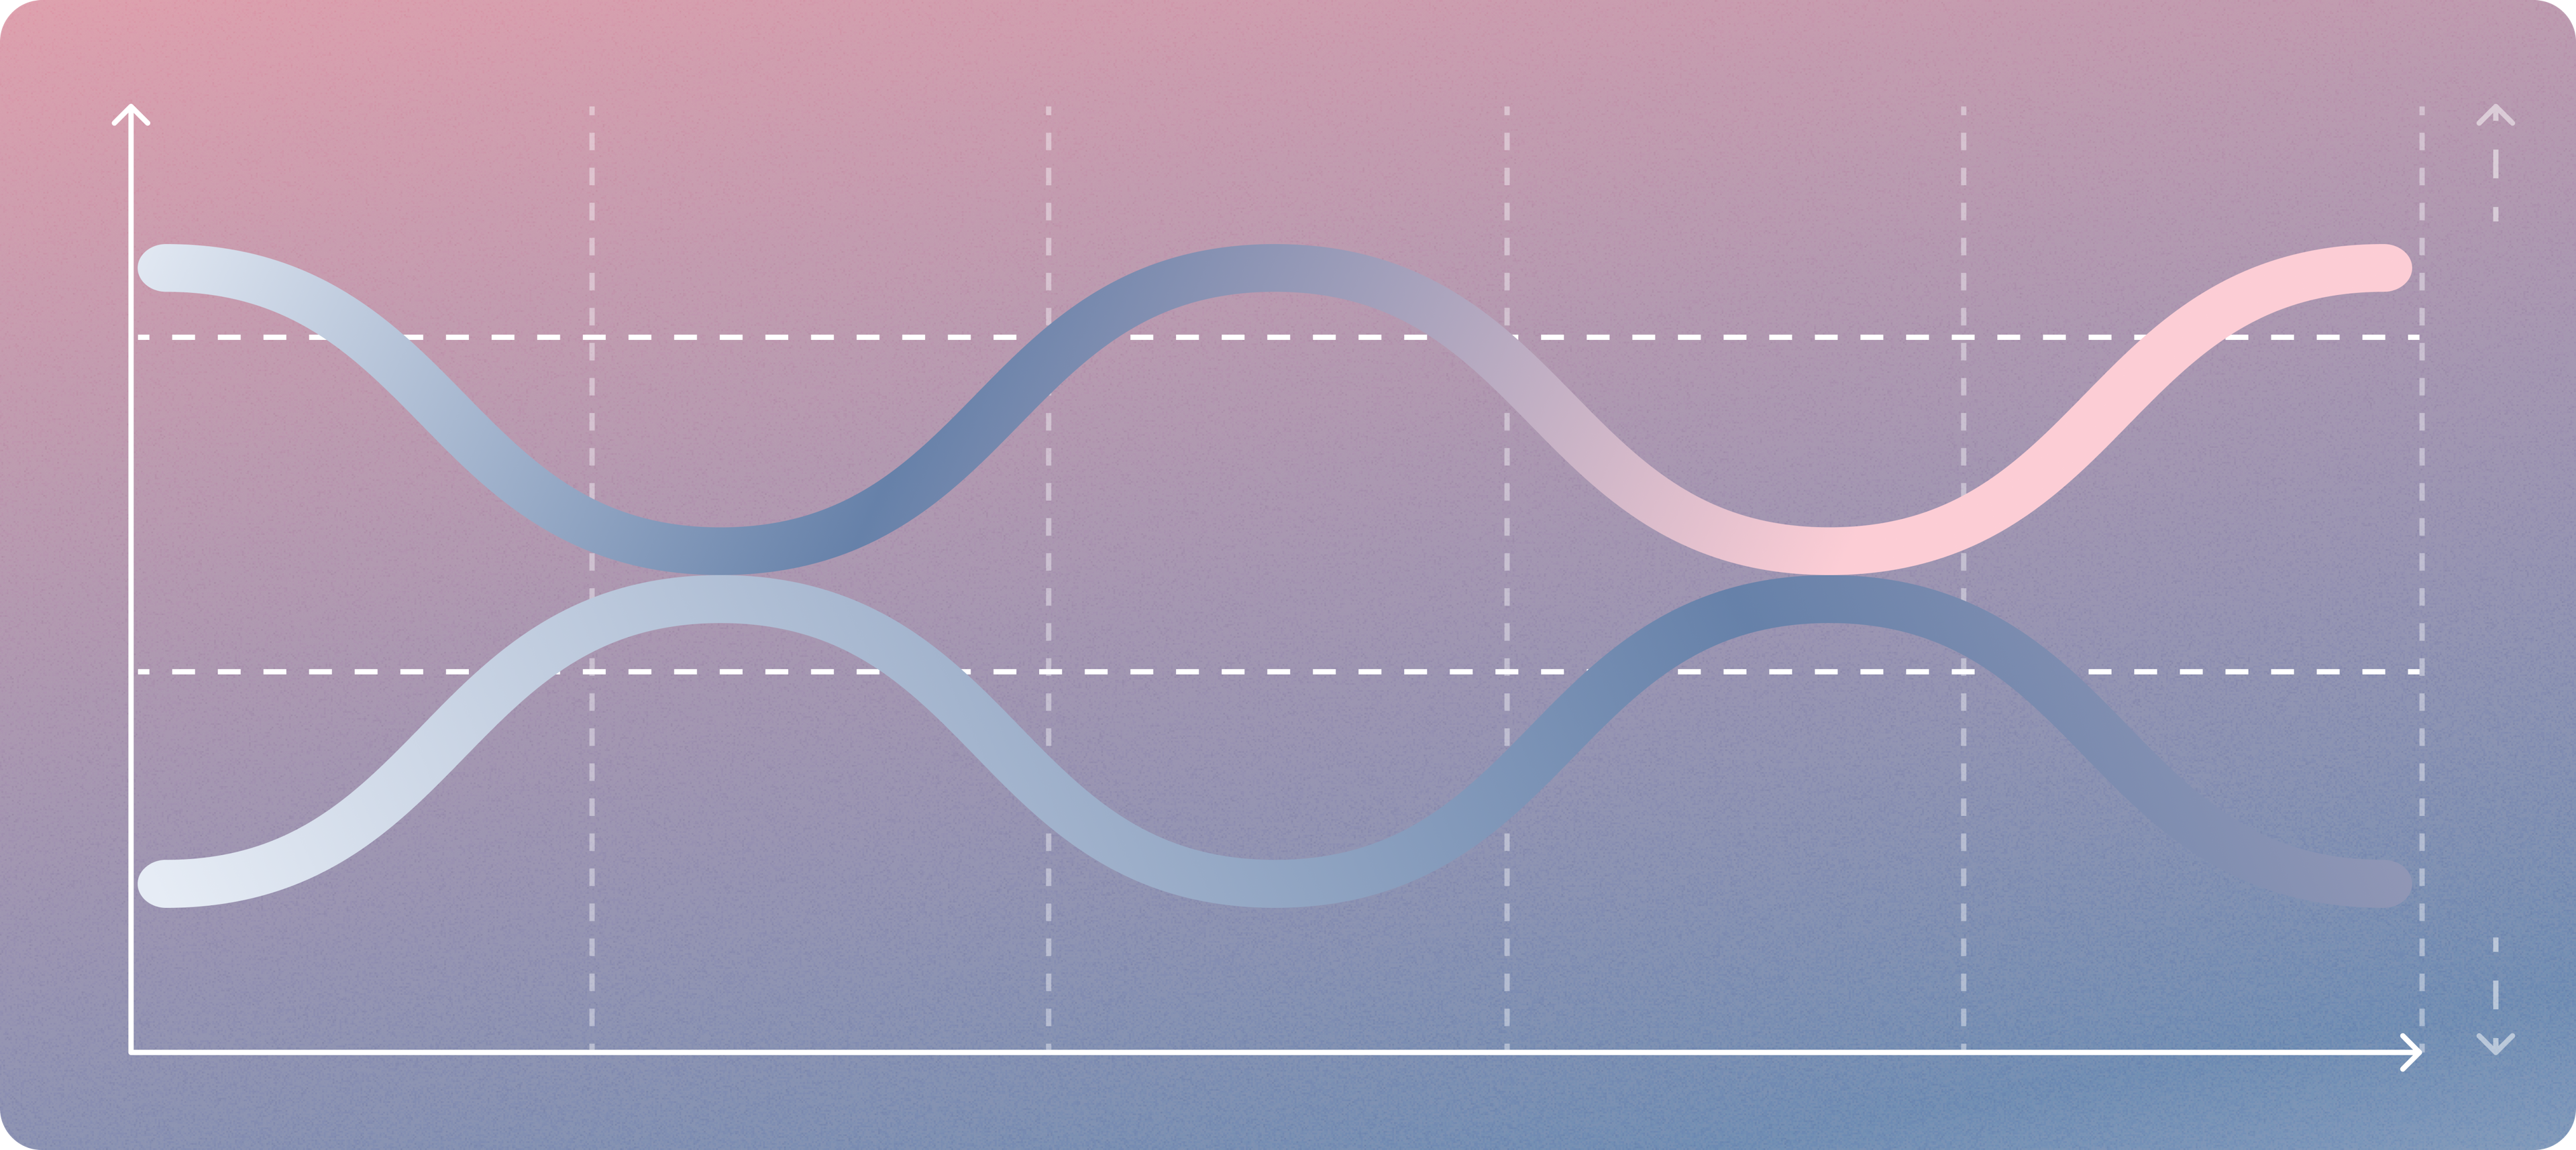 Graphic illustration of wavy lines against a linear backdrop, showing abstract ebb and flow of a chart | Leading and lagging indicators | Mercury